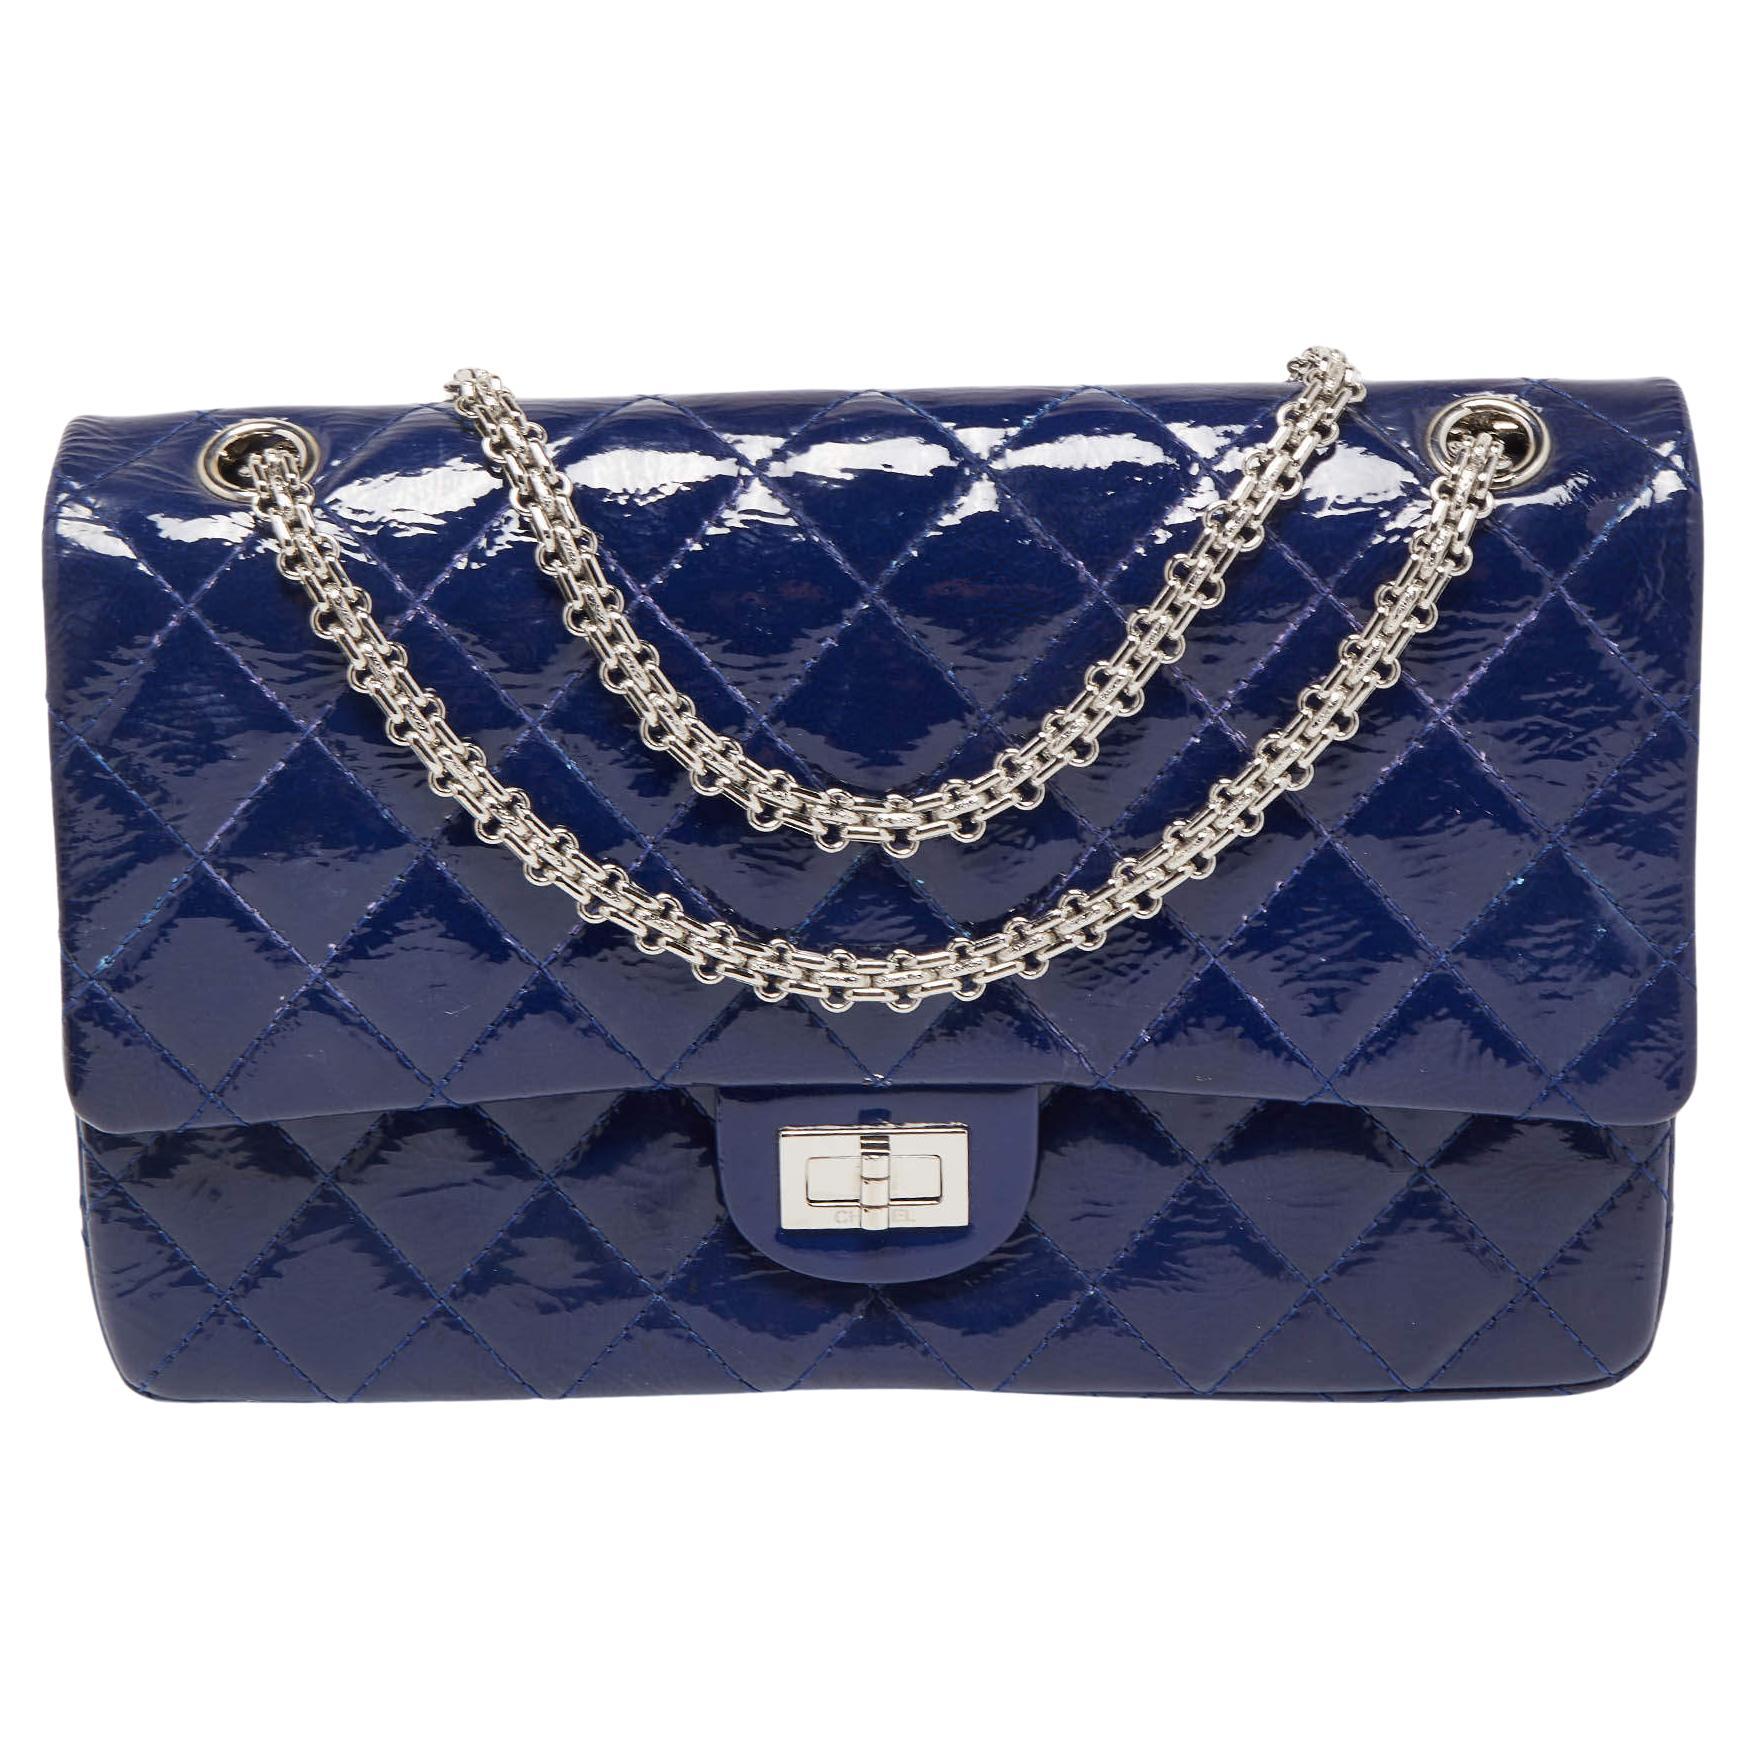 Chanel Blue Quilted Patent Leather Reissue 2.55 Classic 226 Flap Bag